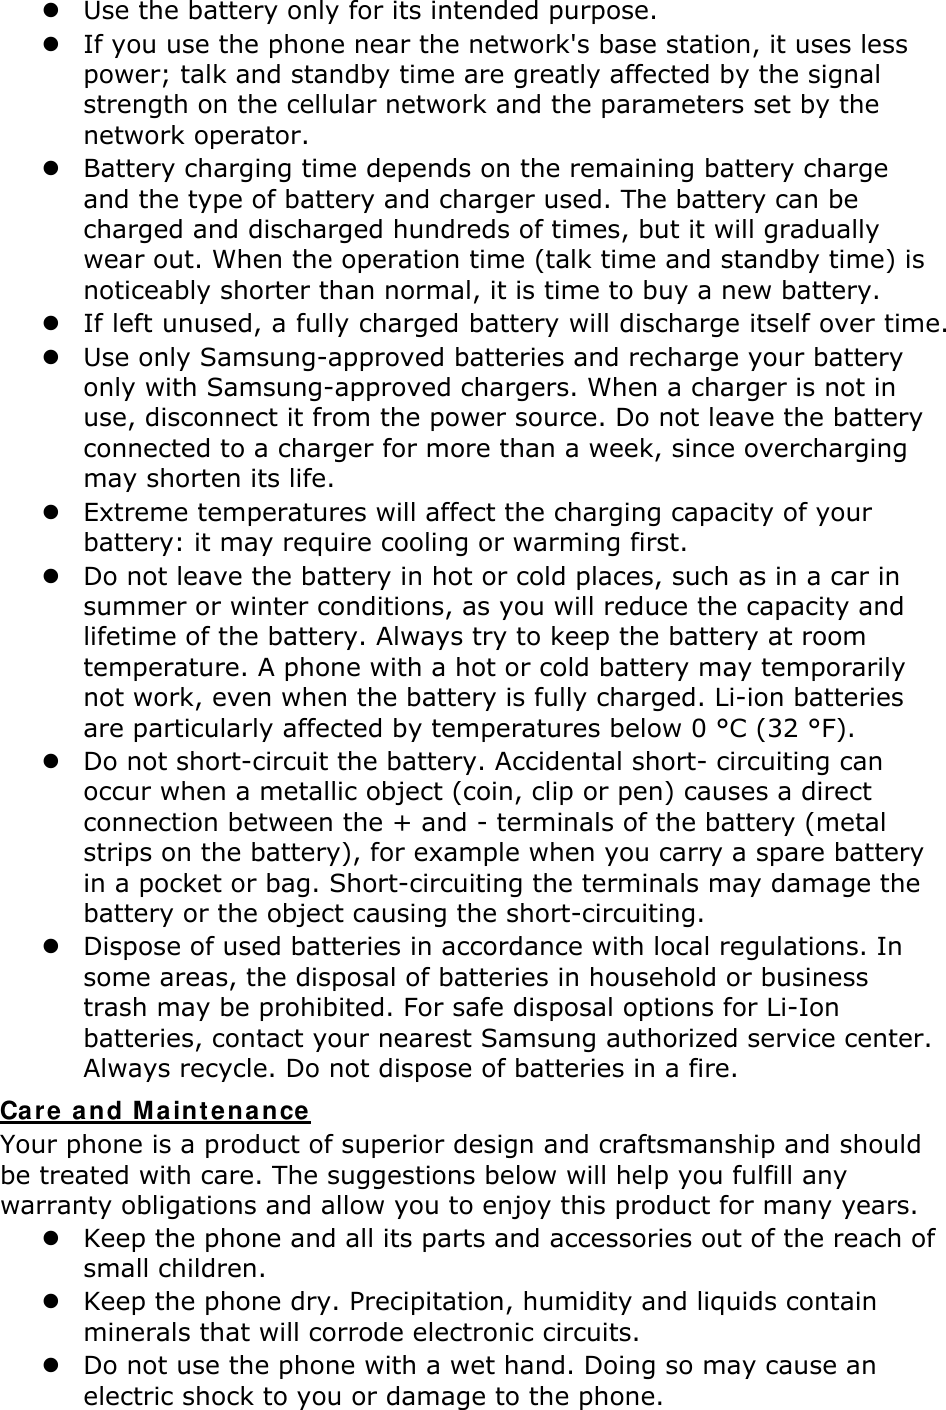  Use the battery only for its intended purpose.  If you use the phone near the network&apos;s base station, it uses less power; talk and standby time are greatly affected by the signal strength on the cellular network and the parameters set by the network operator.  Battery charging time depends on the remaining battery charge and the type of battery and charger used. The battery can be charged and discharged hundreds of times, but it will gradually wear out. When the operation time (talk time and standby time) is noticeably shorter than normal, it is time to buy a new battery.  If left unused, a fully charged battery will discharge itself over time.  Use only Samsung-approved batteries and recharge your battery only with Samsung-approved chargers. When a charger is not in use, disconnect it from the power source. Do not leave the battery connected to a charger for more than a week, since overcharging may shorten its life.  Extreme temperatures will affect the charging capacity of your battery: it may require cooling or warming first.  Do not leave the battery in hot or cold places, such as in a car in summer or winter conditions, as you will reduce the capacity and lifetime of the battery. Always try to keep the battery at room temperature. A phone with a hot or cold battery may temporarily not work, even when the battery is fully charged. Li-ion batteries are particularly affected by temperatures below 0 °C (32 °F).  Do not short-circuit the battery. Accidental short- circuiting can occur when a metallic object (coin, clip or pen) causes a direct connection between the + and - terminals of the battery (metal strips on the battery), for example when you carry a spare battery in a pocket or bag. Short-circuiting the terminals may damage the battery or the object causing the short-circuiting.  Dispose of used batteries in accordance with local regulations. In some areas, the disposal of batteries in household or business trash may be prohibited. For safe disposal options for Li-Ion batteries, contact your nearest Samsung authorized service center. Always recycle. Do not dispose of batteries in a fire. Care a nd Maint ena nce Your phone is a product of superior design and craftsmanship and should be treated with care. The suggestions below will help you fulfill any warranty obligations and allow you to enjoy this product for many years.  Keep the phone and all its parts and accessories out of the reach of small children.  Keep the phone dry. Precipitation, humidity and liquids contain minerals that will corrode electronic circuits.  Do not use the phone with a wet hand. Doing so may cause an electric shock to you or damage to the phone. 